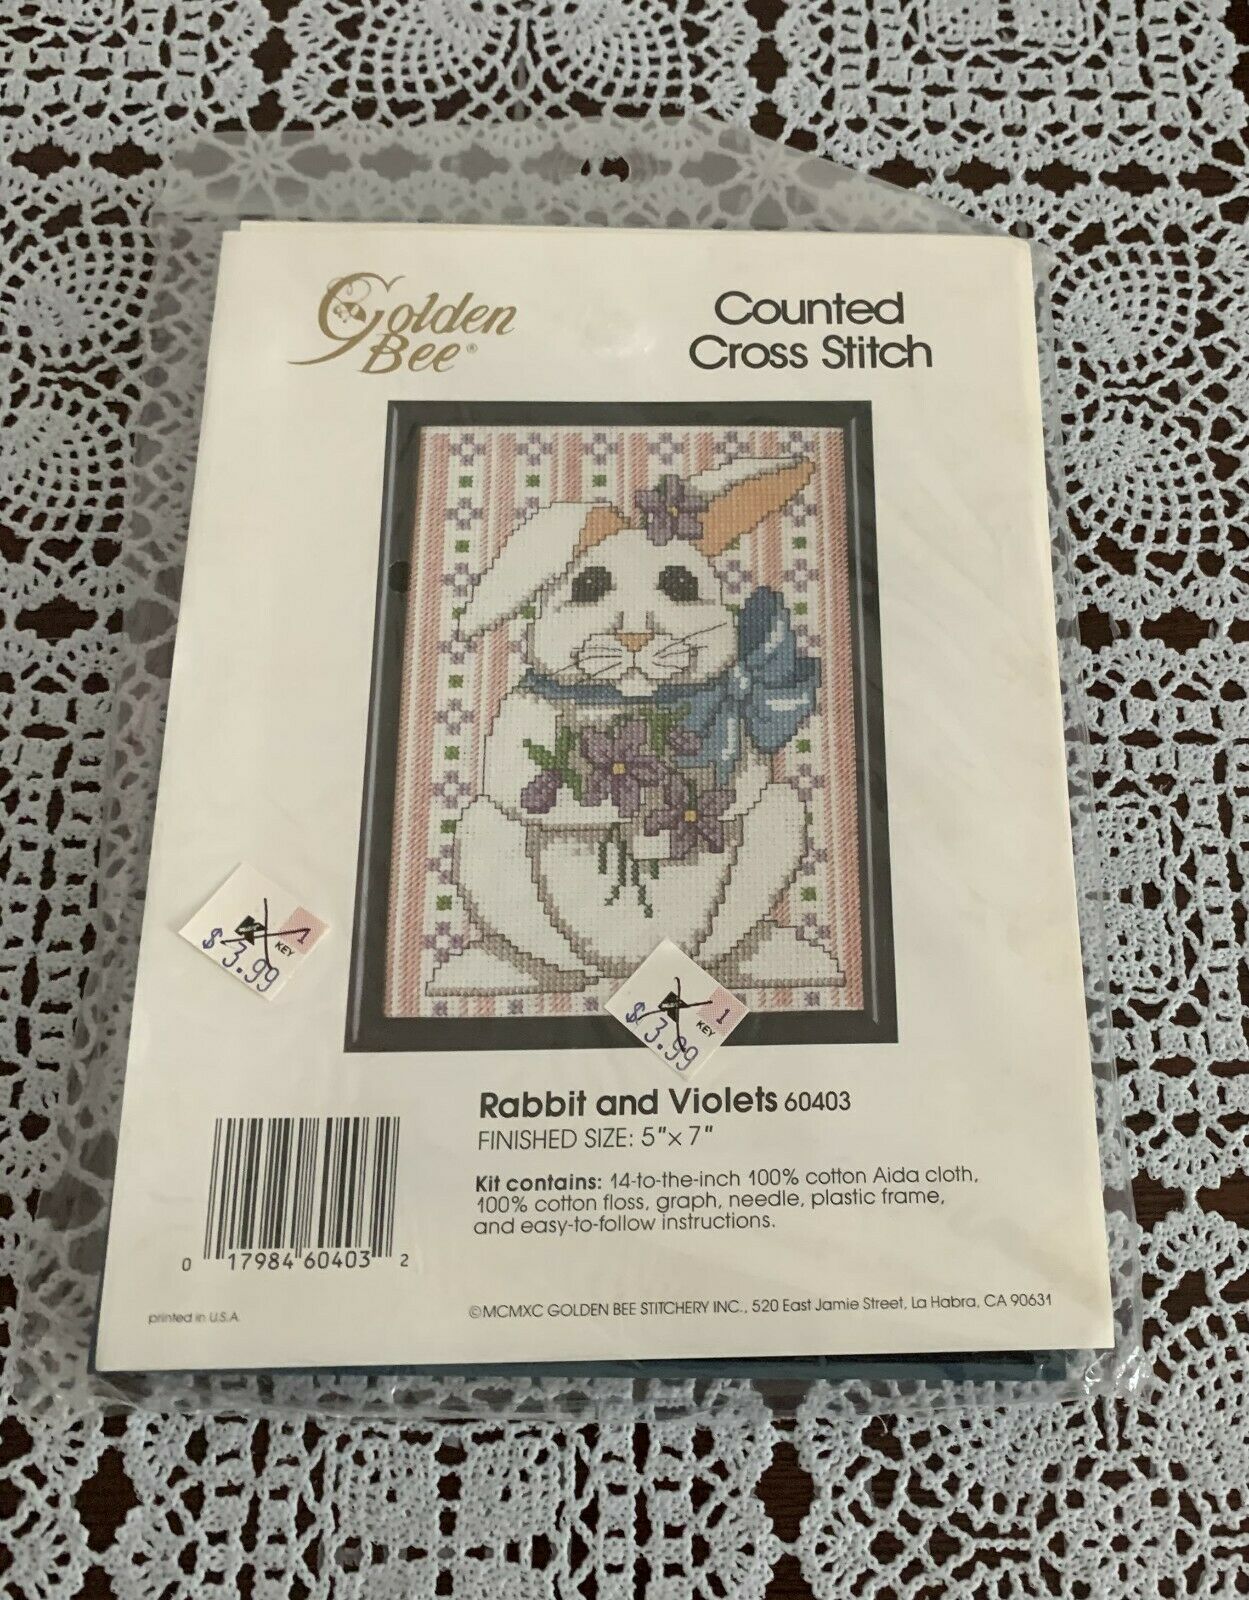 Primary image for Brand New Golden Bee Counted Cross Stitch Kit 60403 Rabbit and Violets 4 Charity